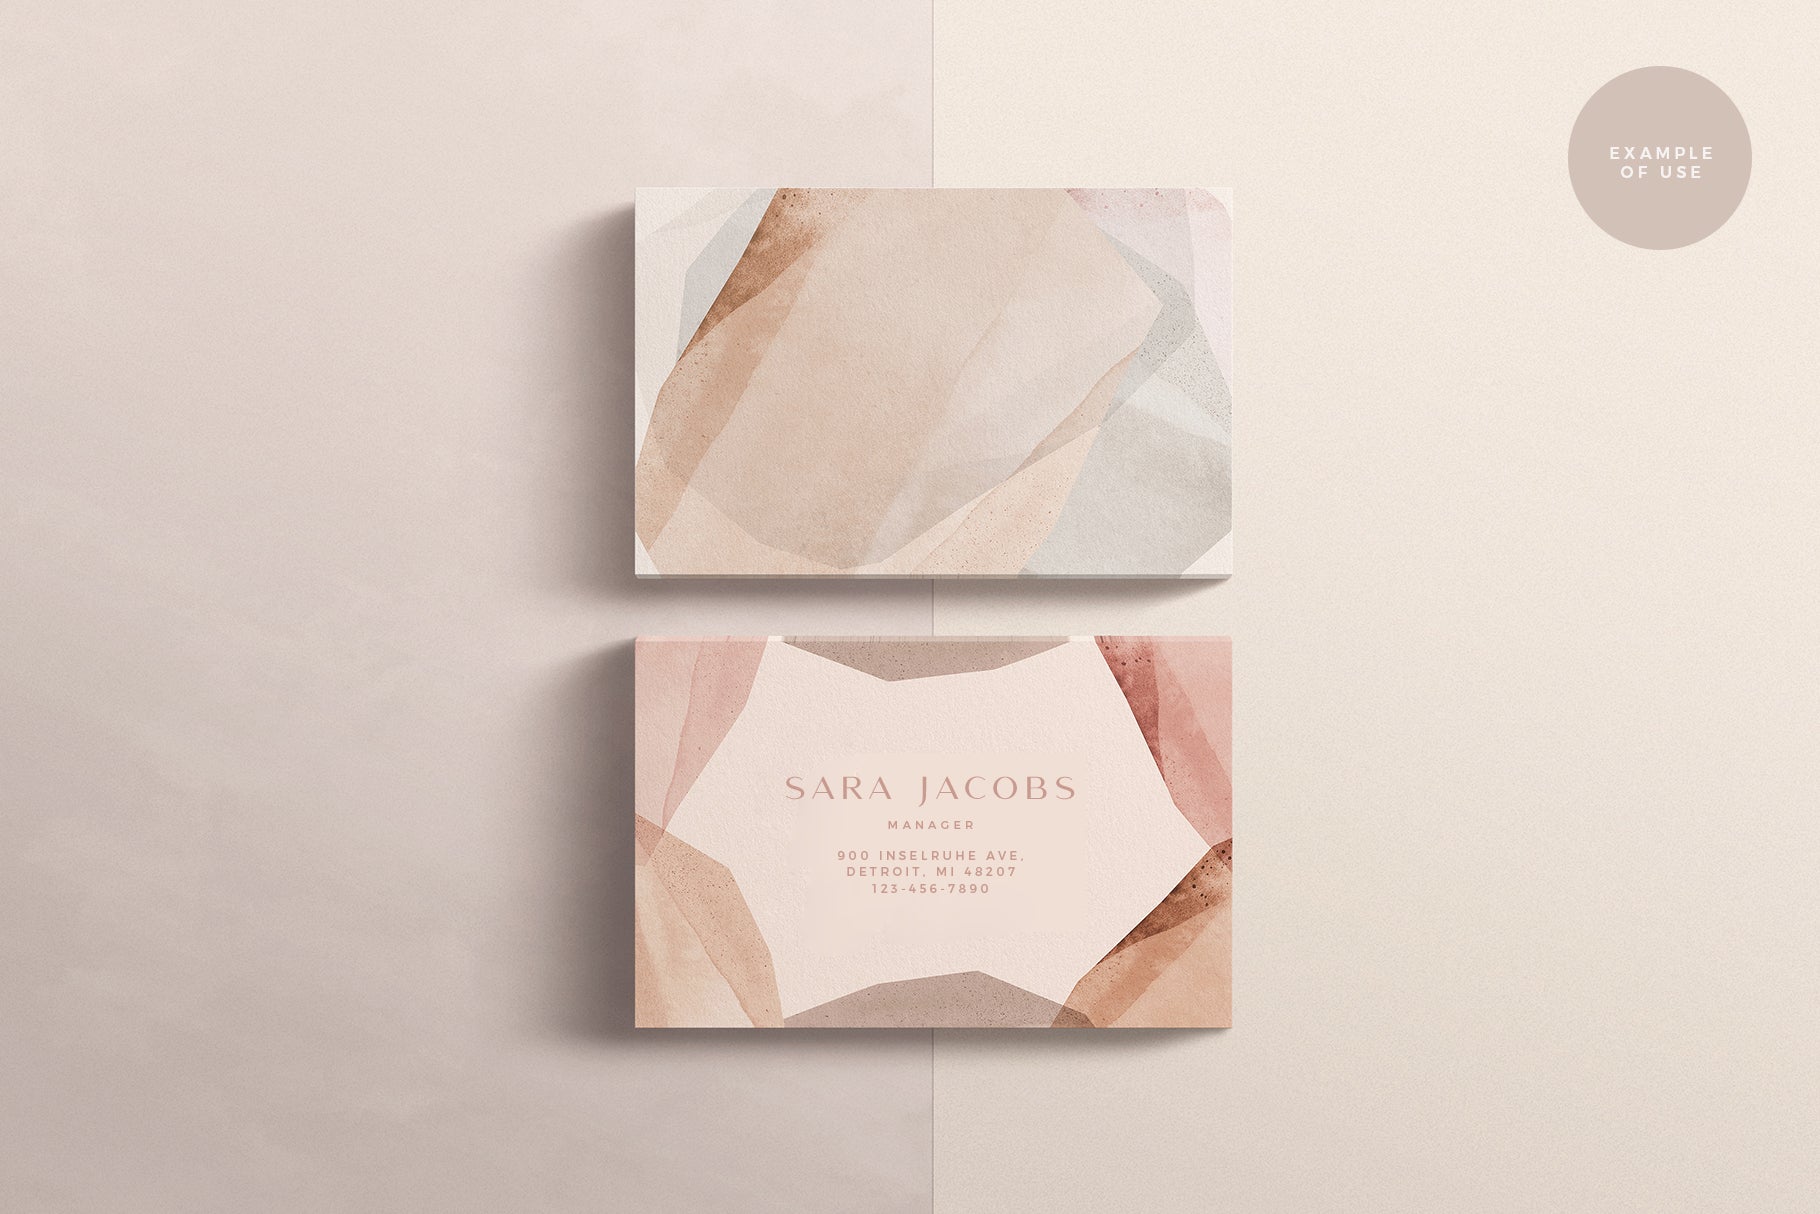 artistic business card design mock up with painted shapes